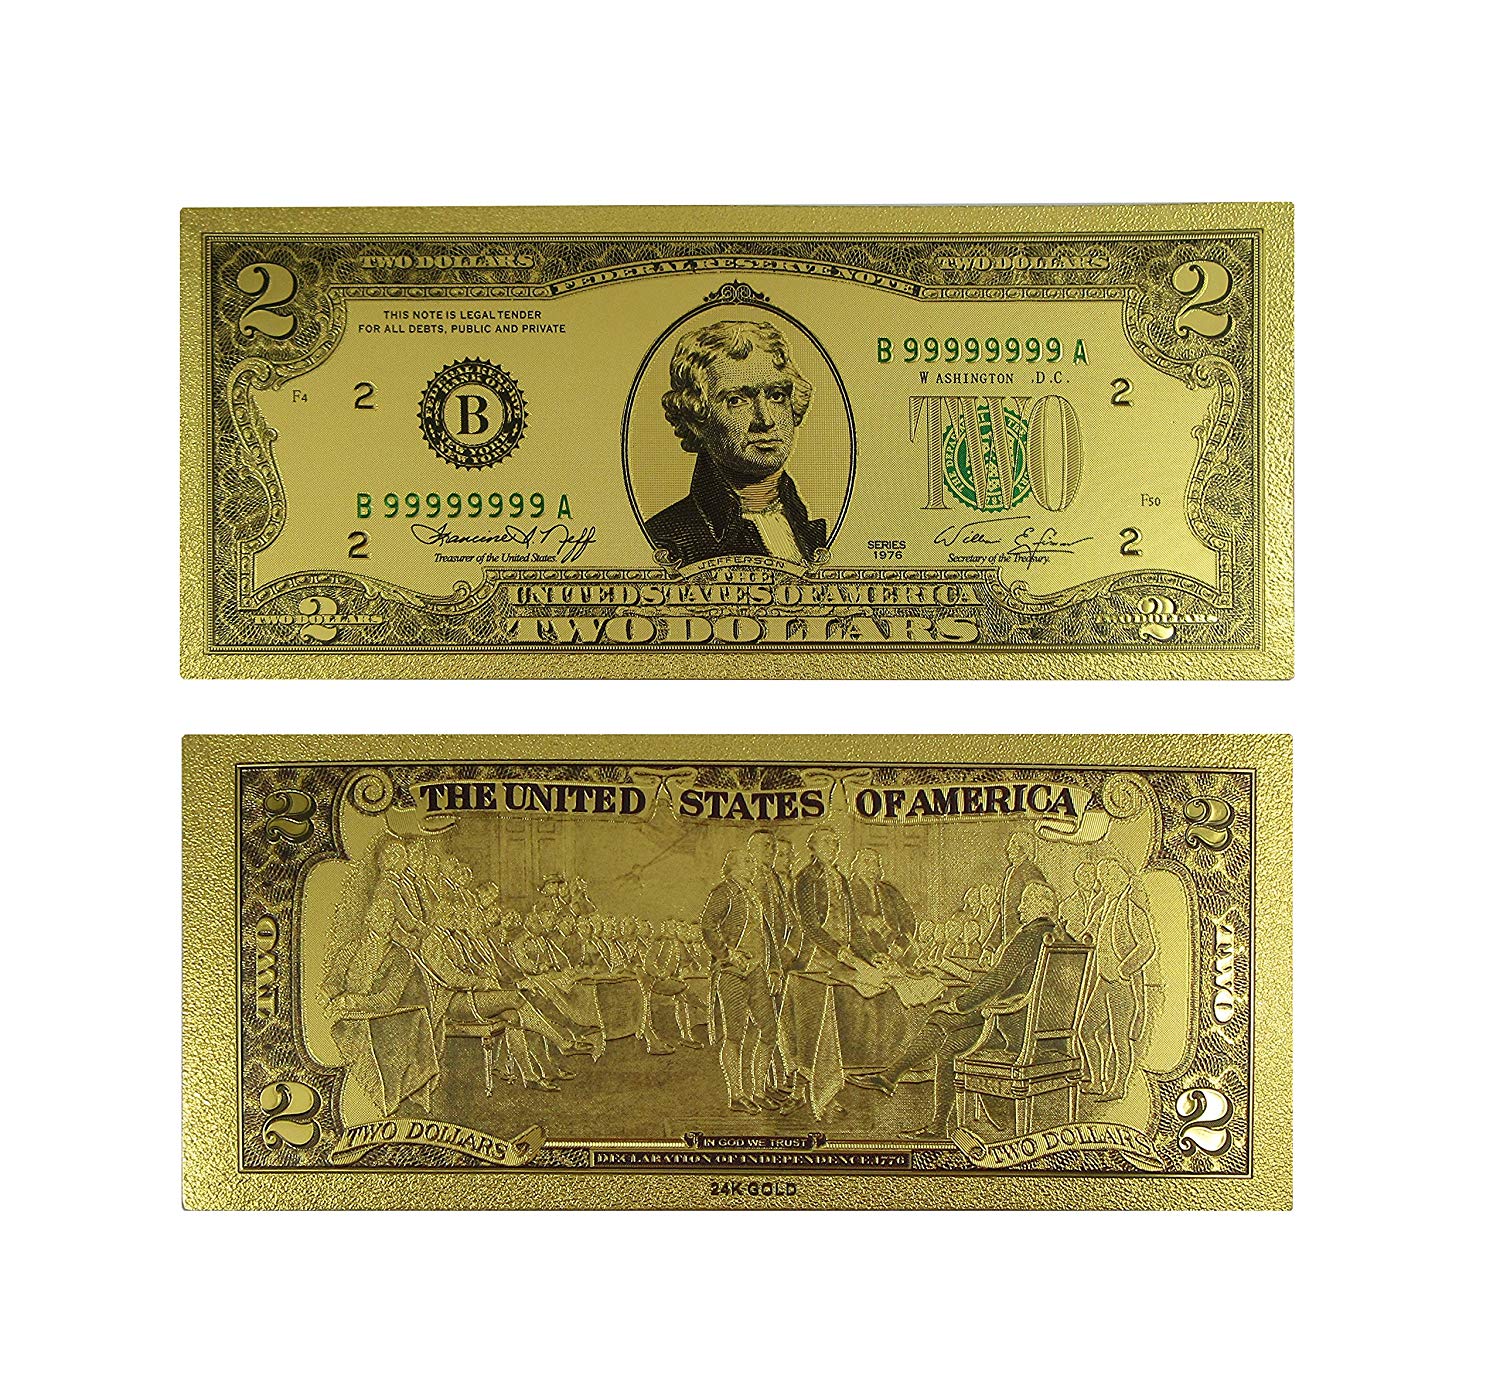 24k Gold Plated Fake Banknote Currency 1 $2 $5 $10 $20 $50 $100 Set of 7 24K Gold and Silver Plated Replica Bills 5